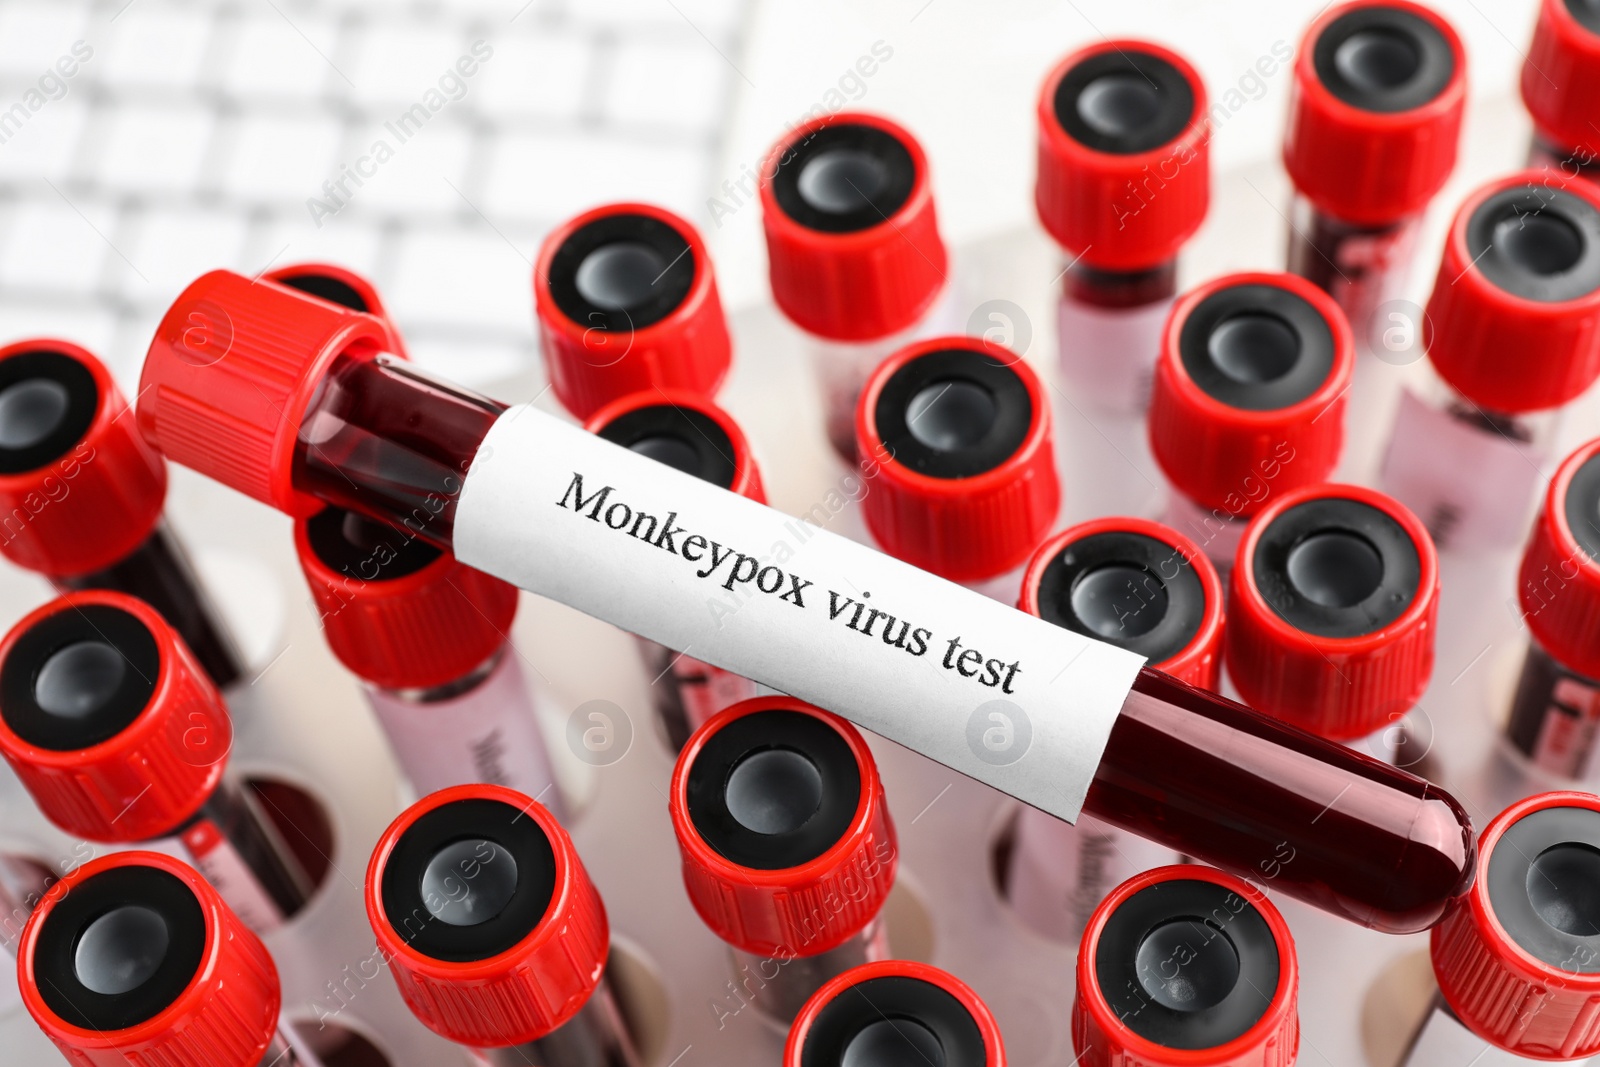 Photo of Monkeypox virus test. One sample tube with blood on others, closeup